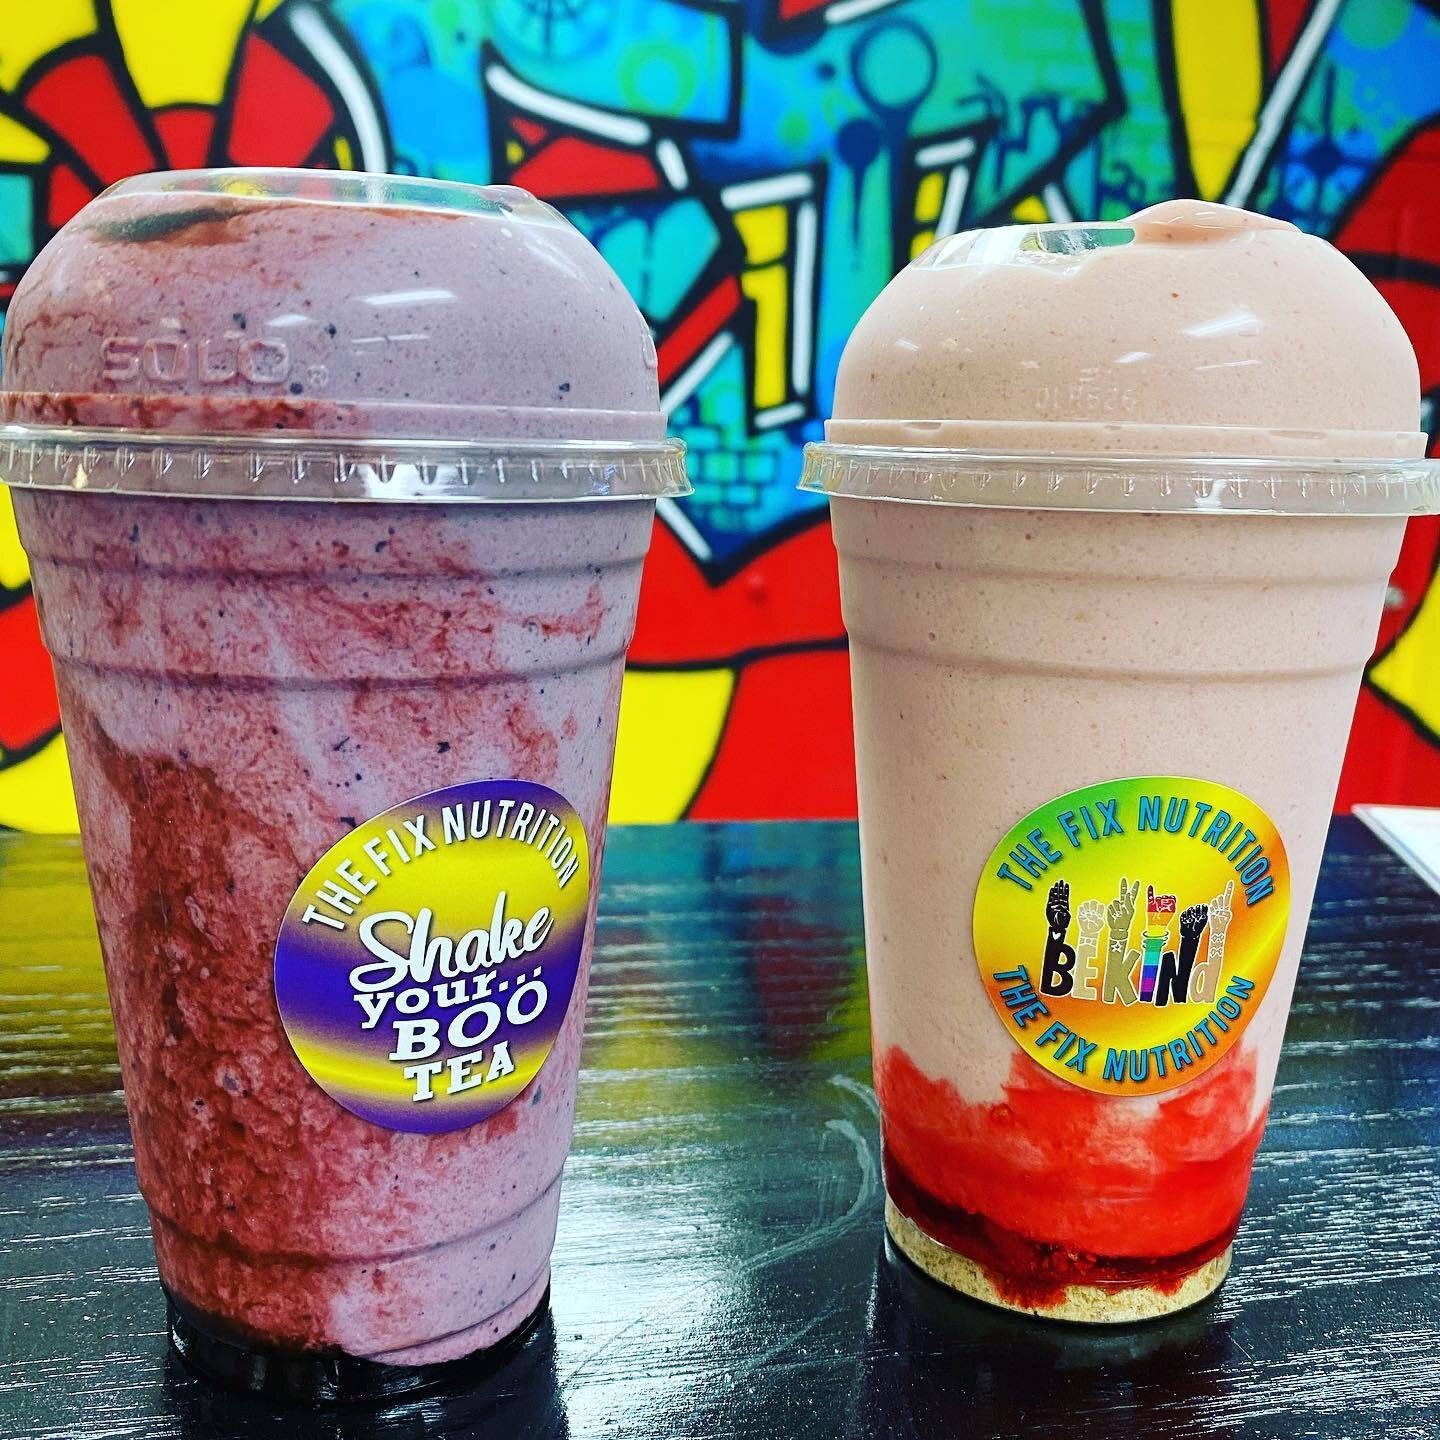 Who is feeling fruity today?
Mixed Berry (left) or Strawberry milkshake?